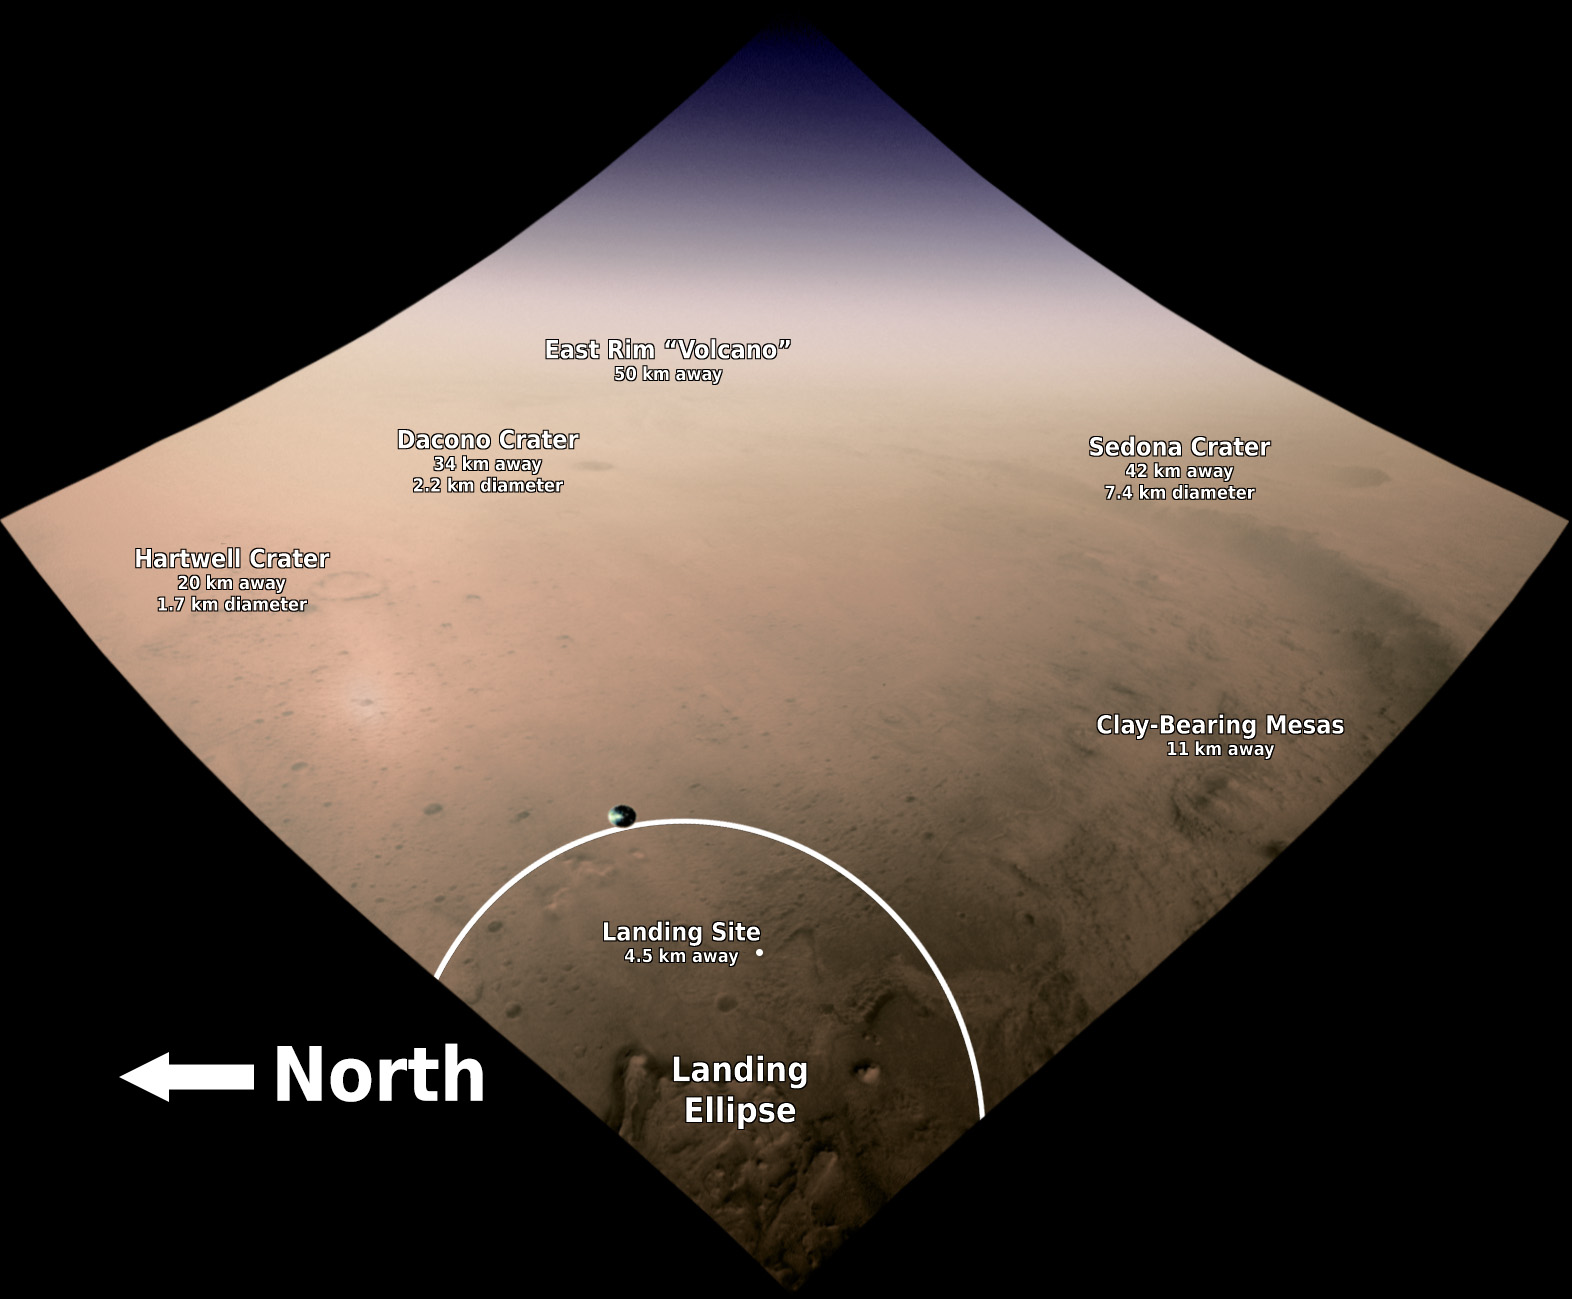 Colorized Lander Vision System Camera image with annotations. Clockwise from top center the annotations read: East Rim Crater, 50 kilometers away. Sedona Crater, 42 kilometers away, 7.4 kilometer diameter. Clay-bearing mesas, 11 kilometers away. Landing site, 4.5 kilometers away. Landing ellipse. A white circle encloses the landing ellipse. Hartwell Crater, 20 kilometers away, 1.7 kilometer diameter. Dacono Crater, 34 kilometers away, 2.2 kilometer diameter.